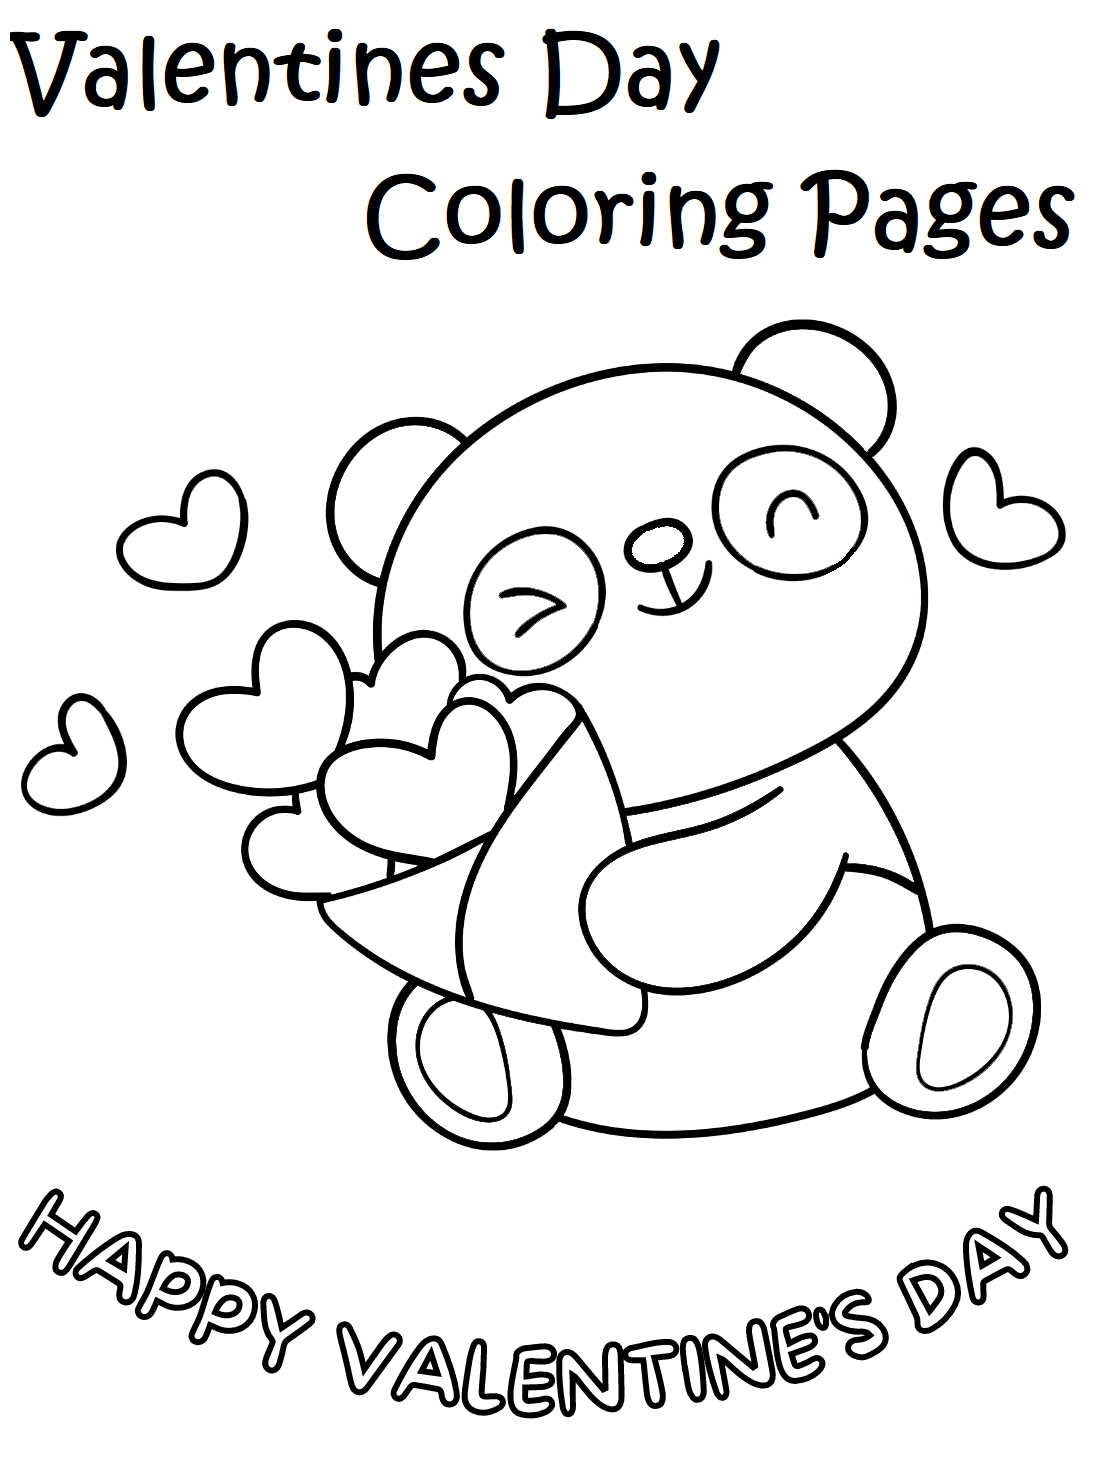 Valentines Day Coloring Pages Free Online For Kids